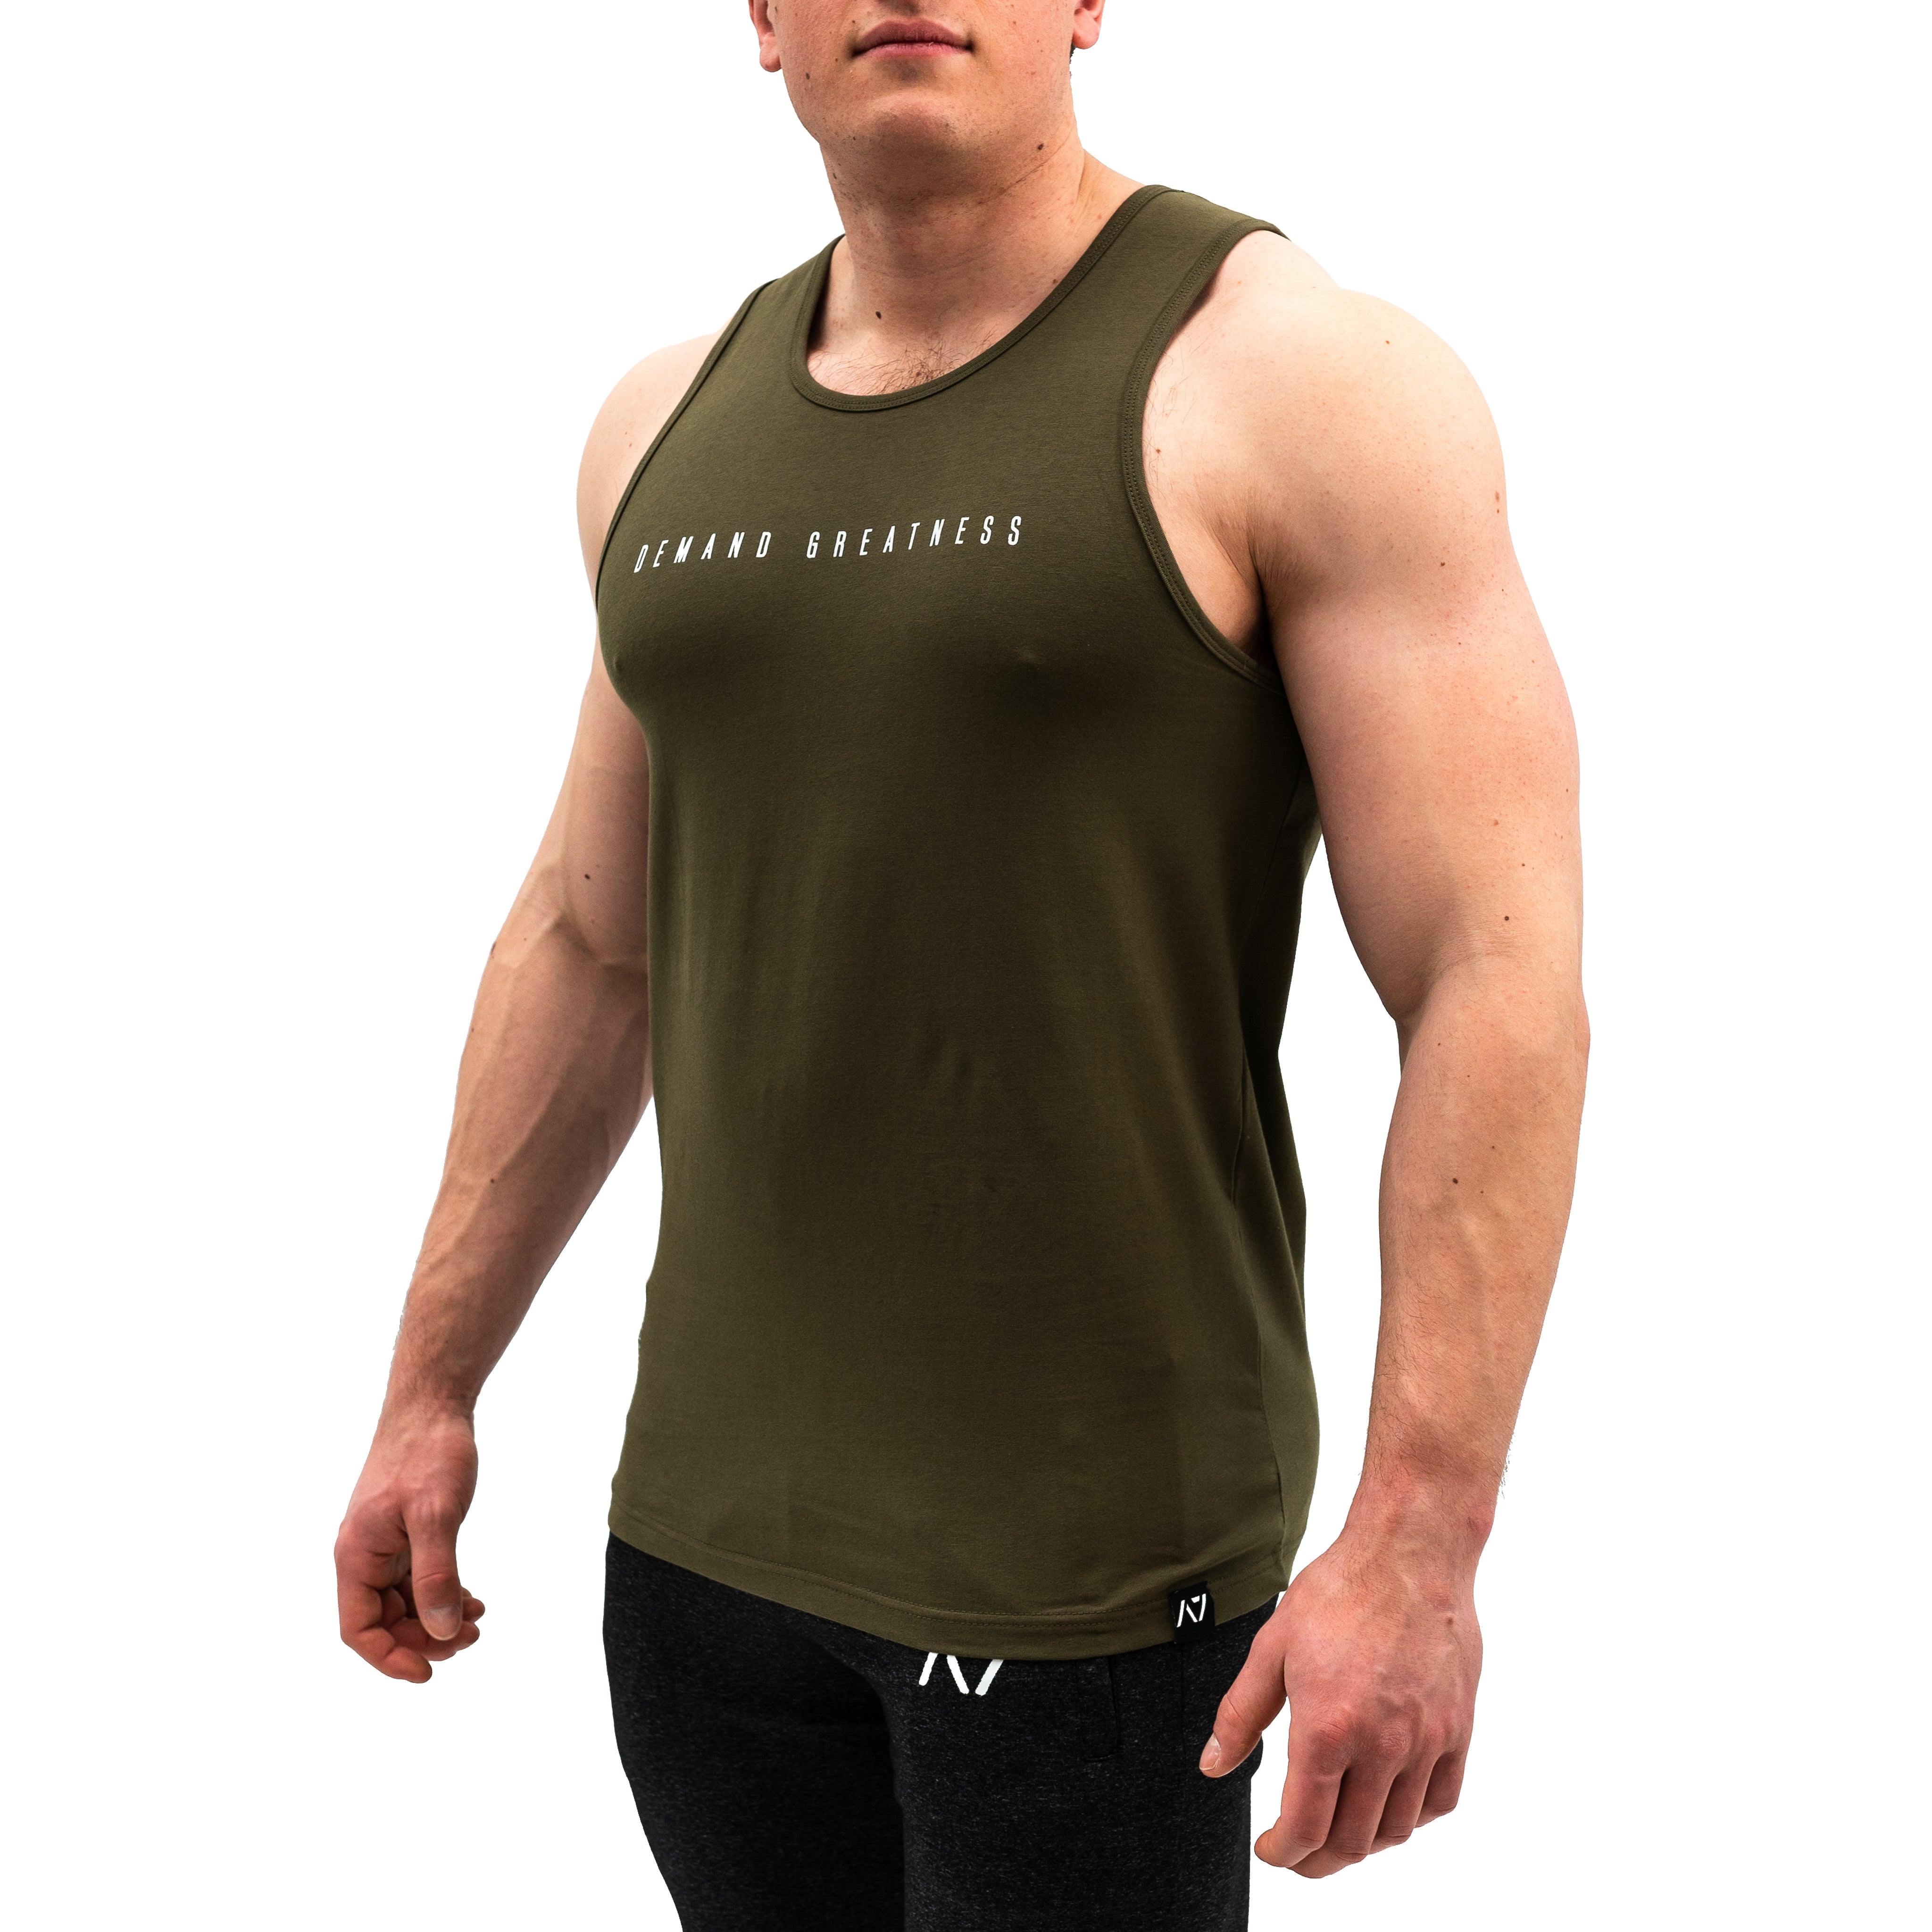 Mantra Bar Grip tank, great as a squat shirt. Purchase Mantra Bar Grip tank in UK from A7 UK. Purchase Mantra Bar Grip Tank in Europe from A7 Europe. No more chalk or sliding. Best Bar Grip T-shirts, shipping to UK and Europe from A7 UK. Mantra Bar Grip Tank is our newest tank design with demand greatness on the front in a military colourway! A7UK supplies the best Powerlifting apparel for all your workouts. Available in UK and Europe including France, Italy, Germany, the Netherlands, Sweden and Poland.